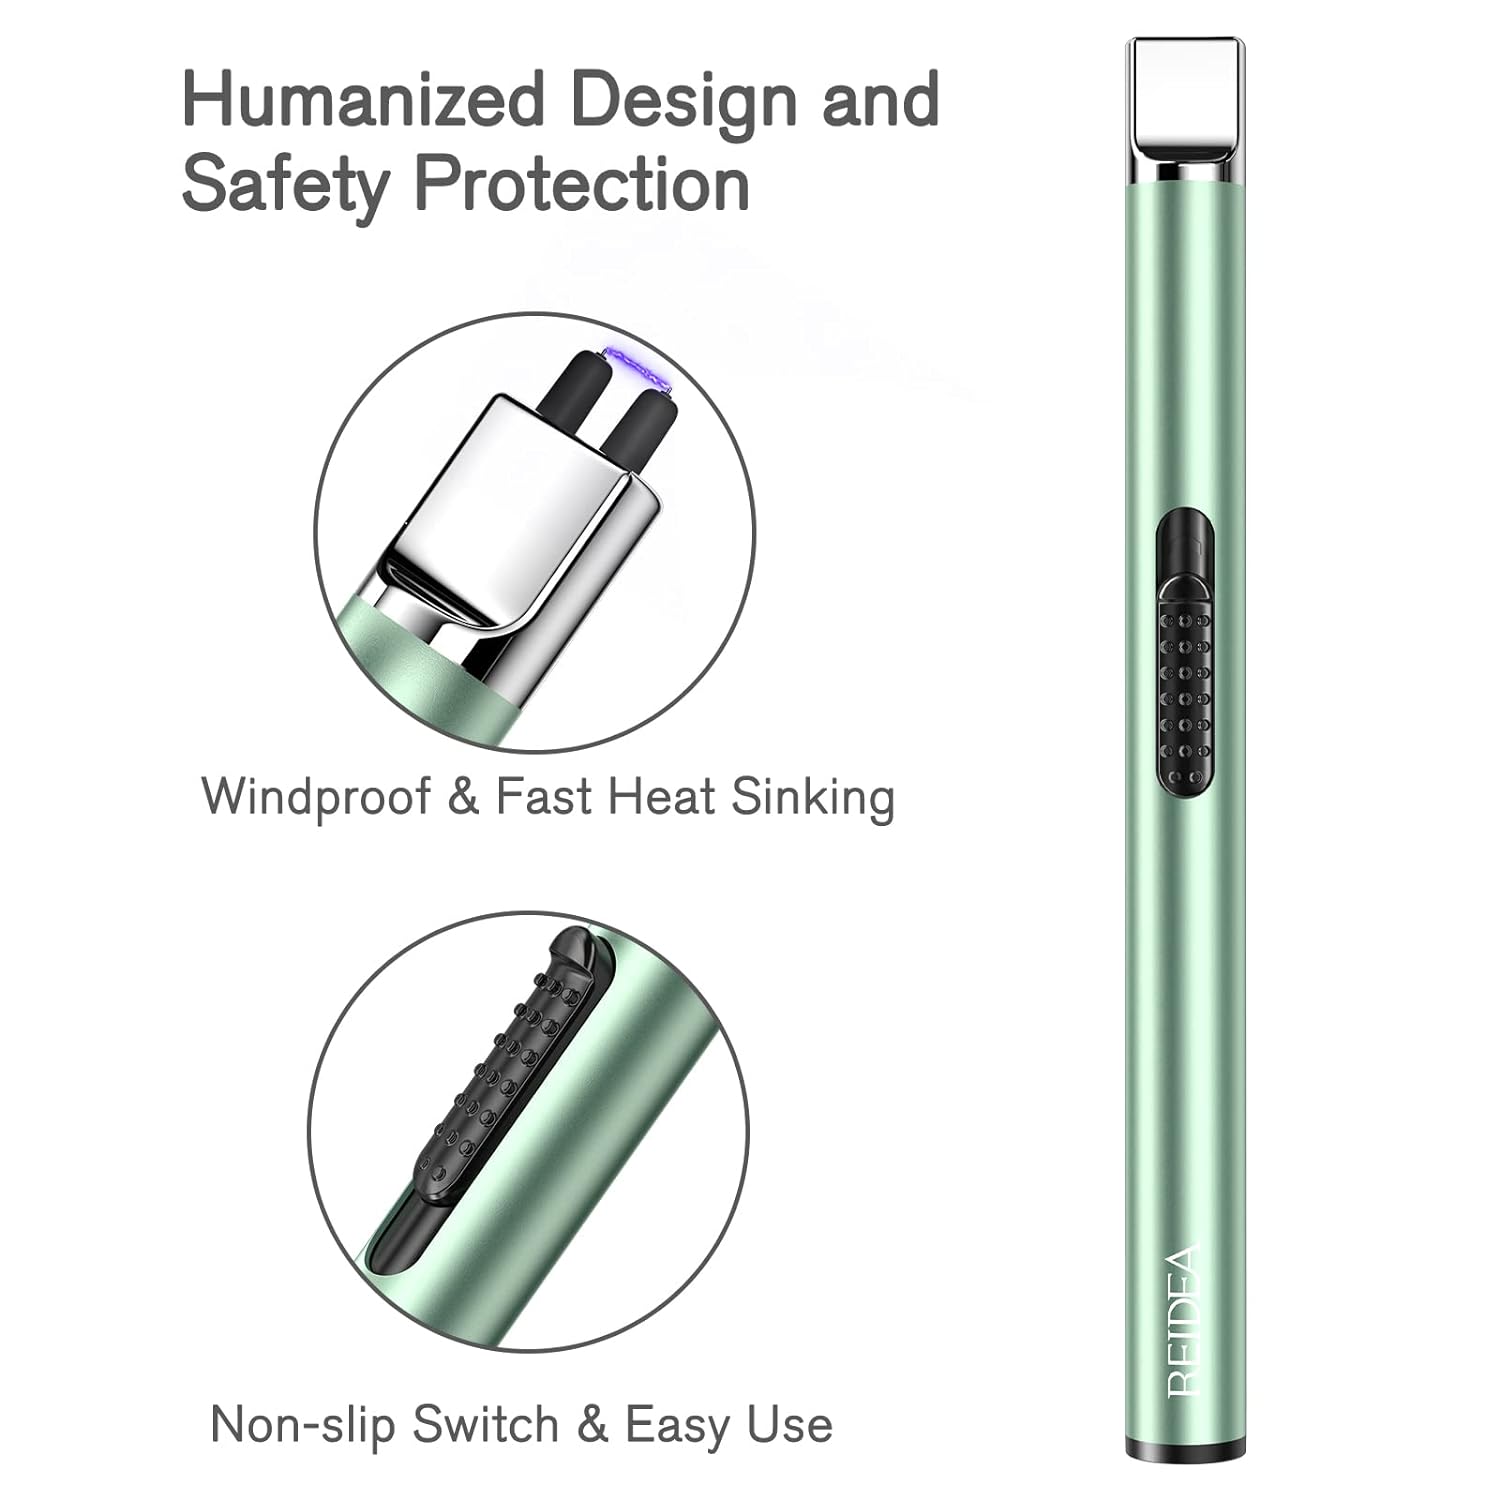 Candle Lighter Electronic Lighter USB Rechargeable with Security Lock, Windproof Fast Heat Sinking, Non-Slip Switch Electronic Lighter for Candle, Grill, Camping ( Mint Green )